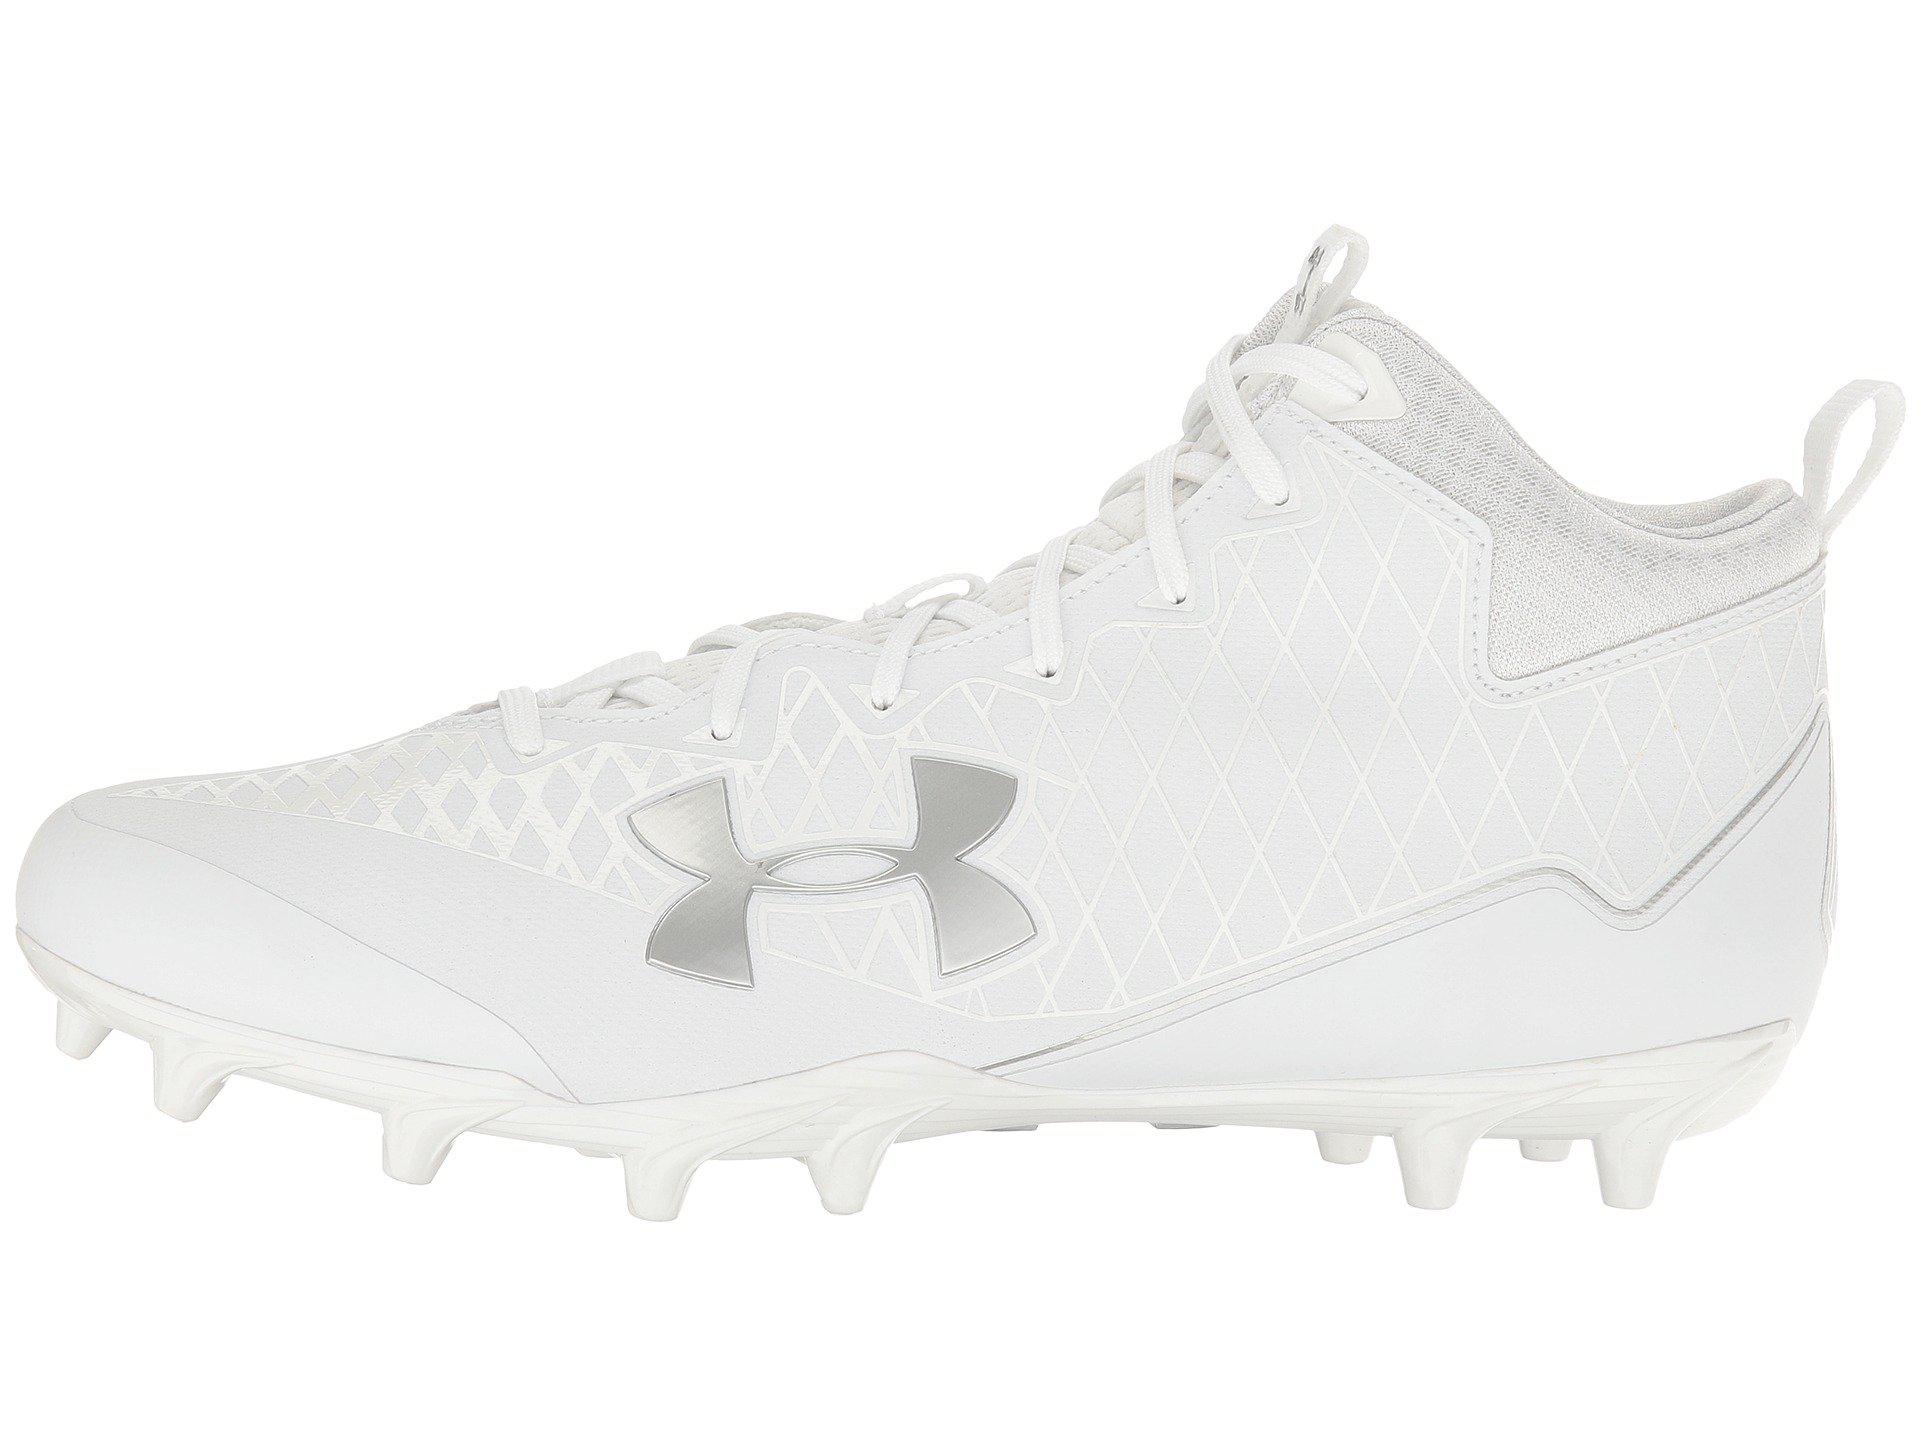 Under Armour Nitro Select Mid MC Cleats Men's White/Green New Multiple Sizes 